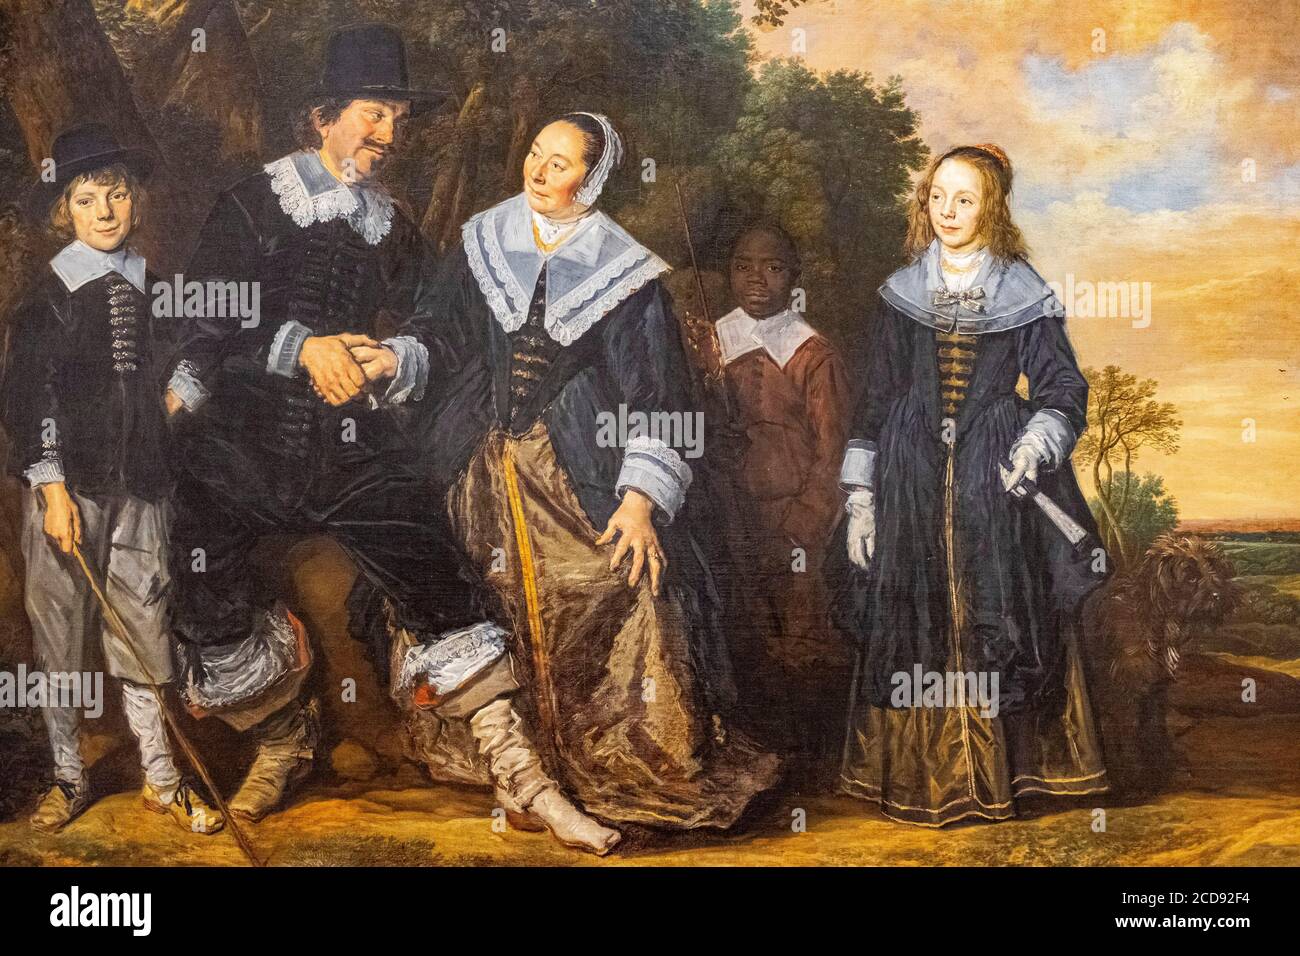 France, Paris, the Custodia Foundation, painting by Frans Hals Stock Photo